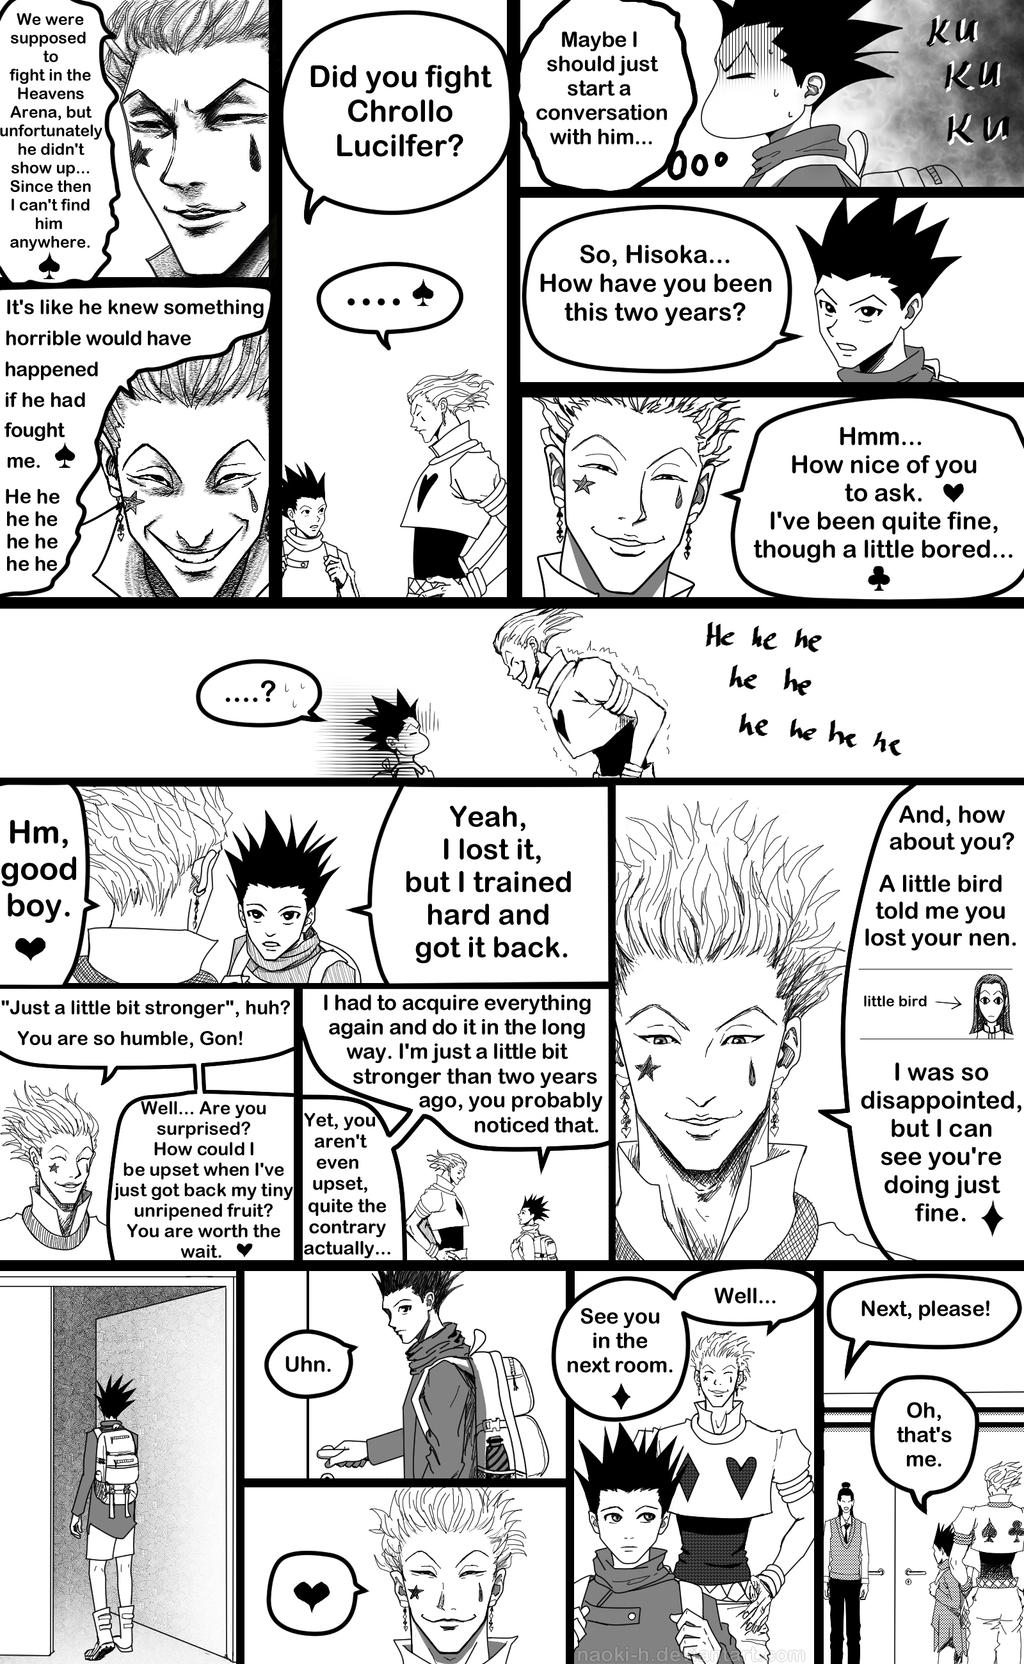 A miracle smile - PAGE 18 by RunStrayWolf on DeviantArt